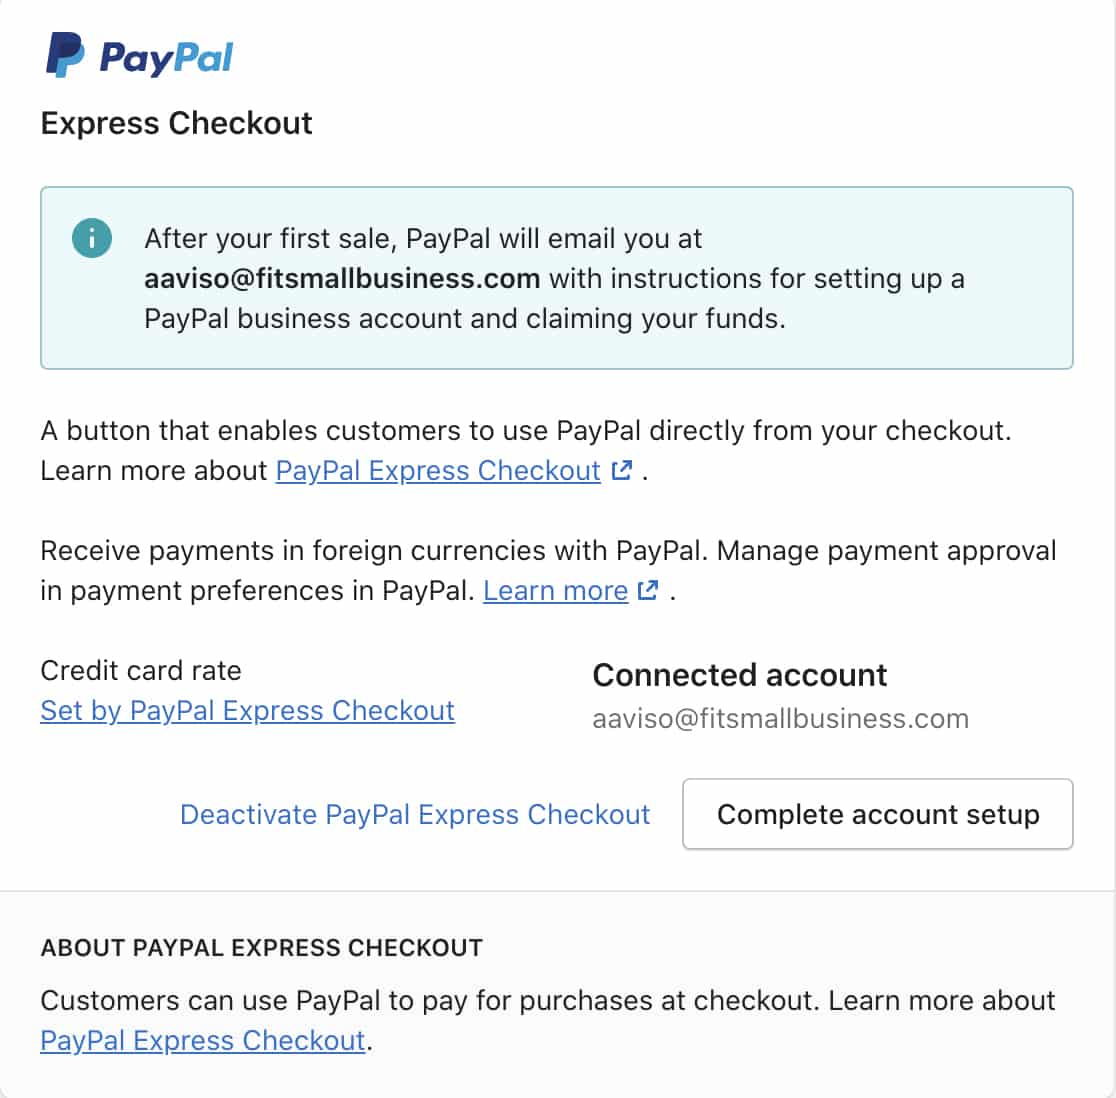 Setting up PayPal express checkout, so that the customers can use PayPal to pay for purchased at checkout.